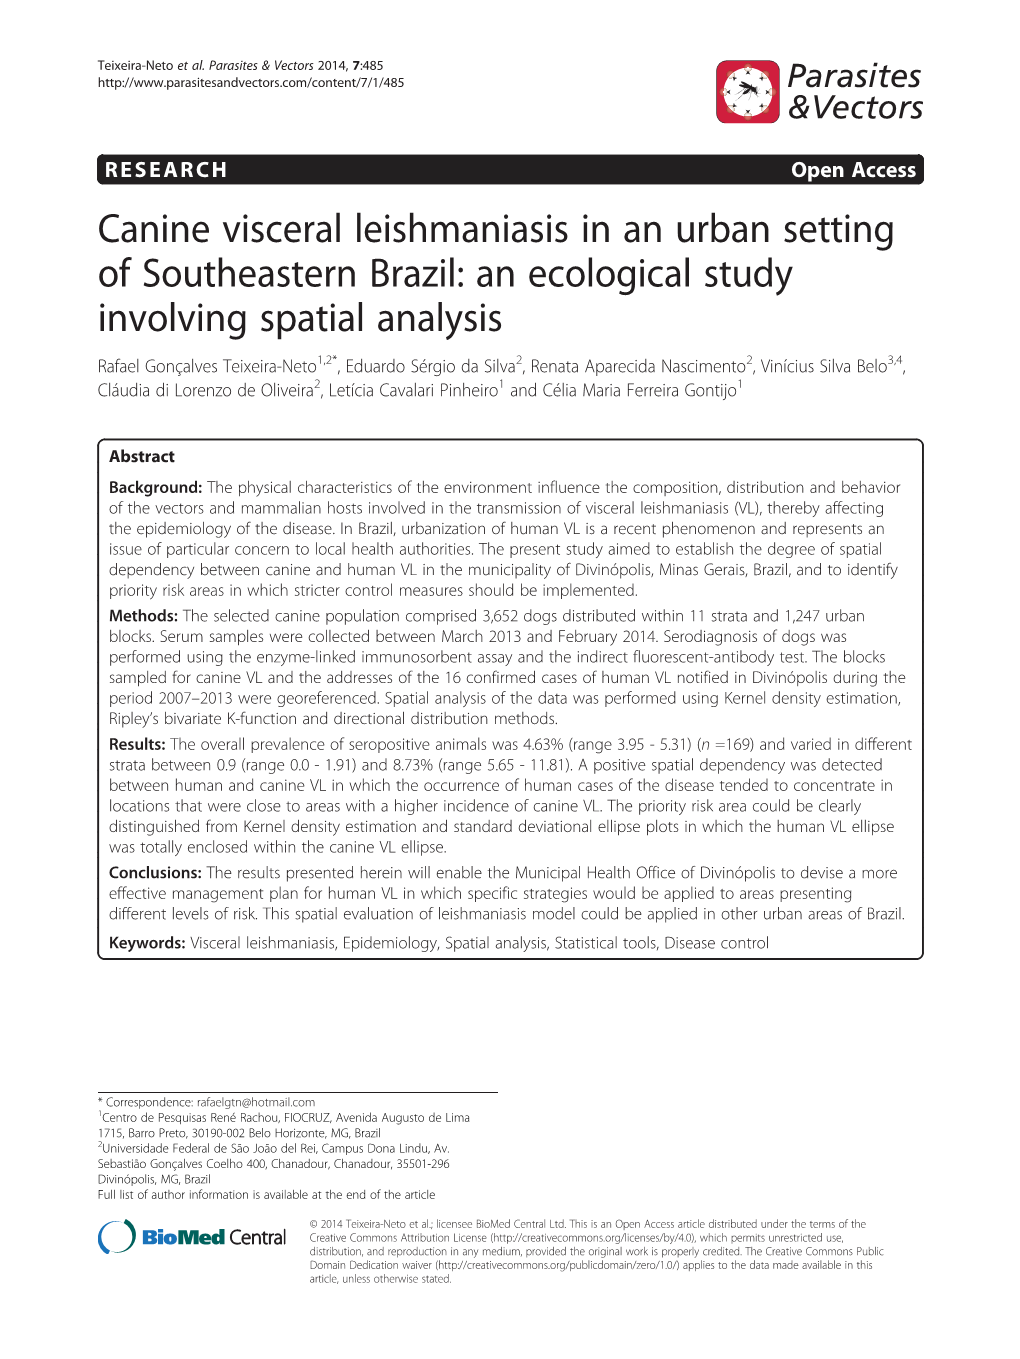 Canine Visceral Leishmaniasis in an Urban Setting of Southeastern Brazil